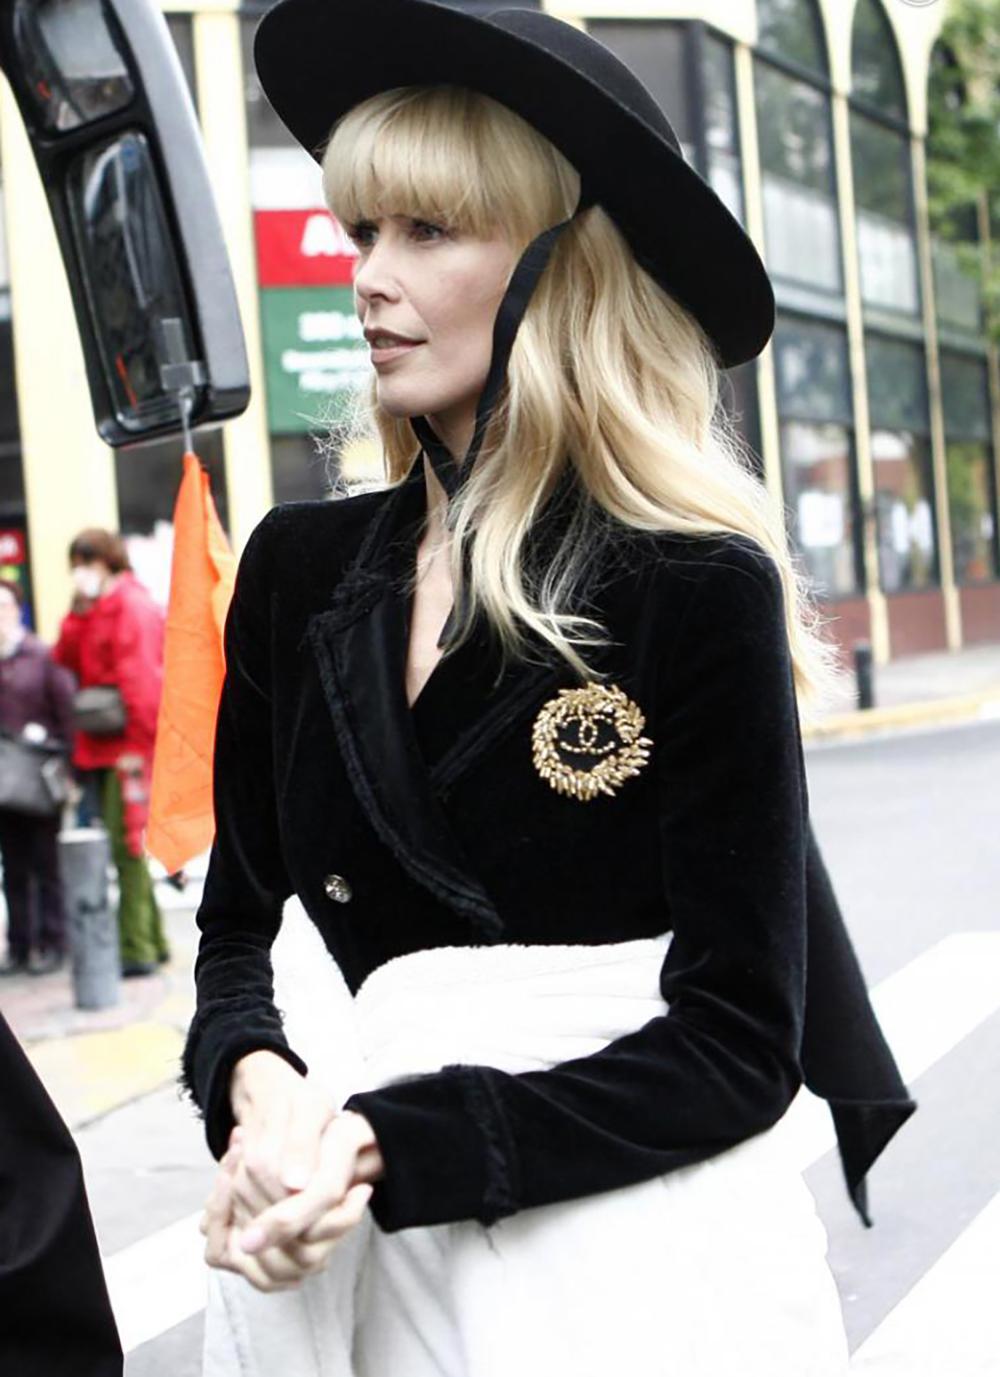 Iconic Chanel black velvet jacket with CC Wheat Logo from Runway of 2010 Spring Collection
As seen on Claudia Schiffer!
- CC logo jewel buttons
Size mark 36 FR. Condition is pristine.